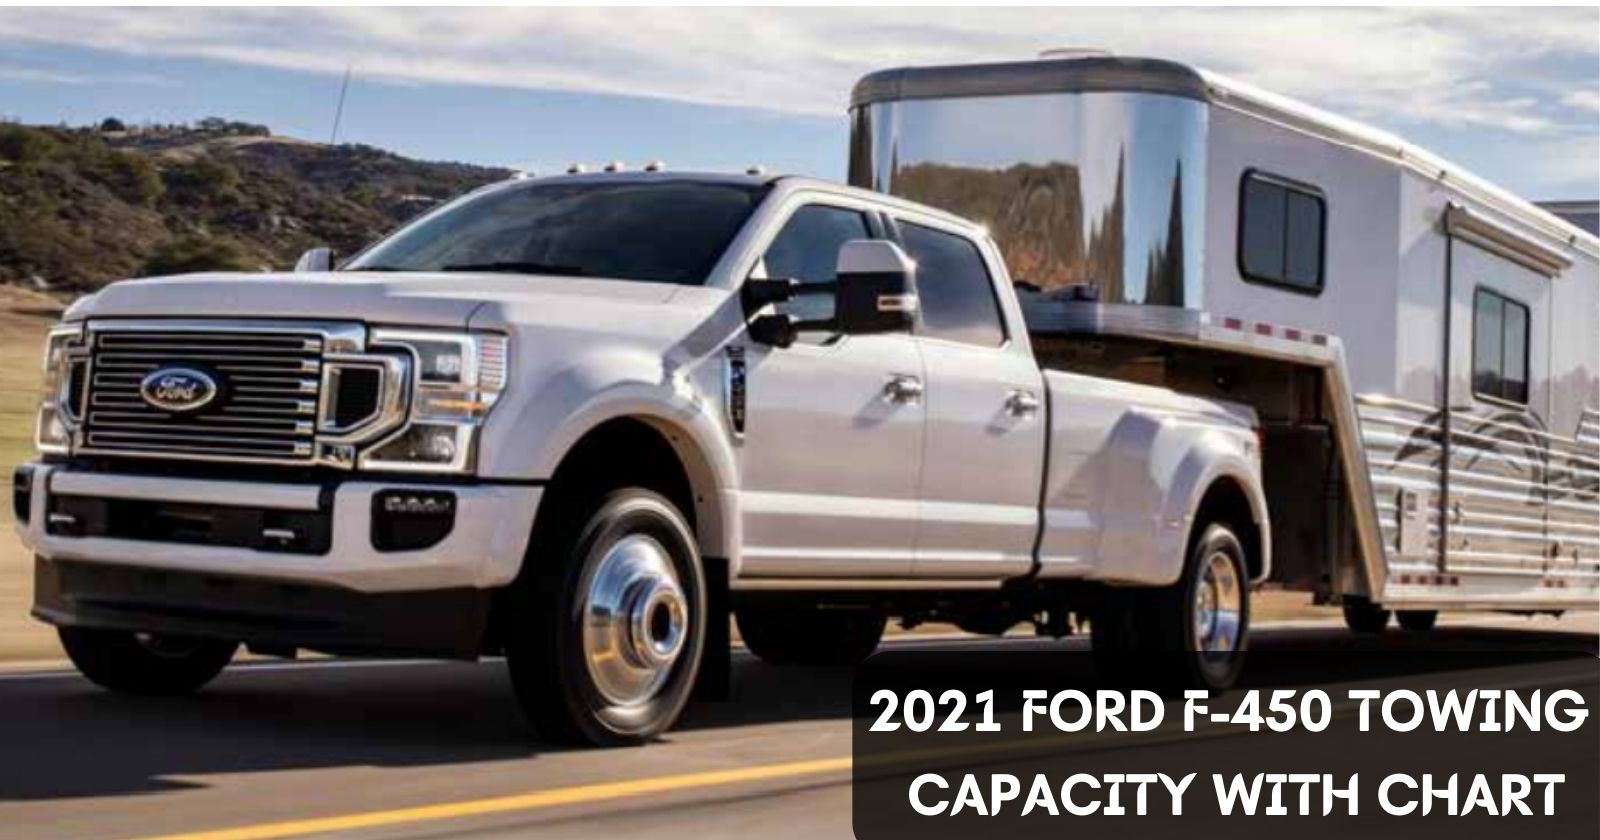 2021-ford-f-450-towing-capacity-with-chart-thecartowing